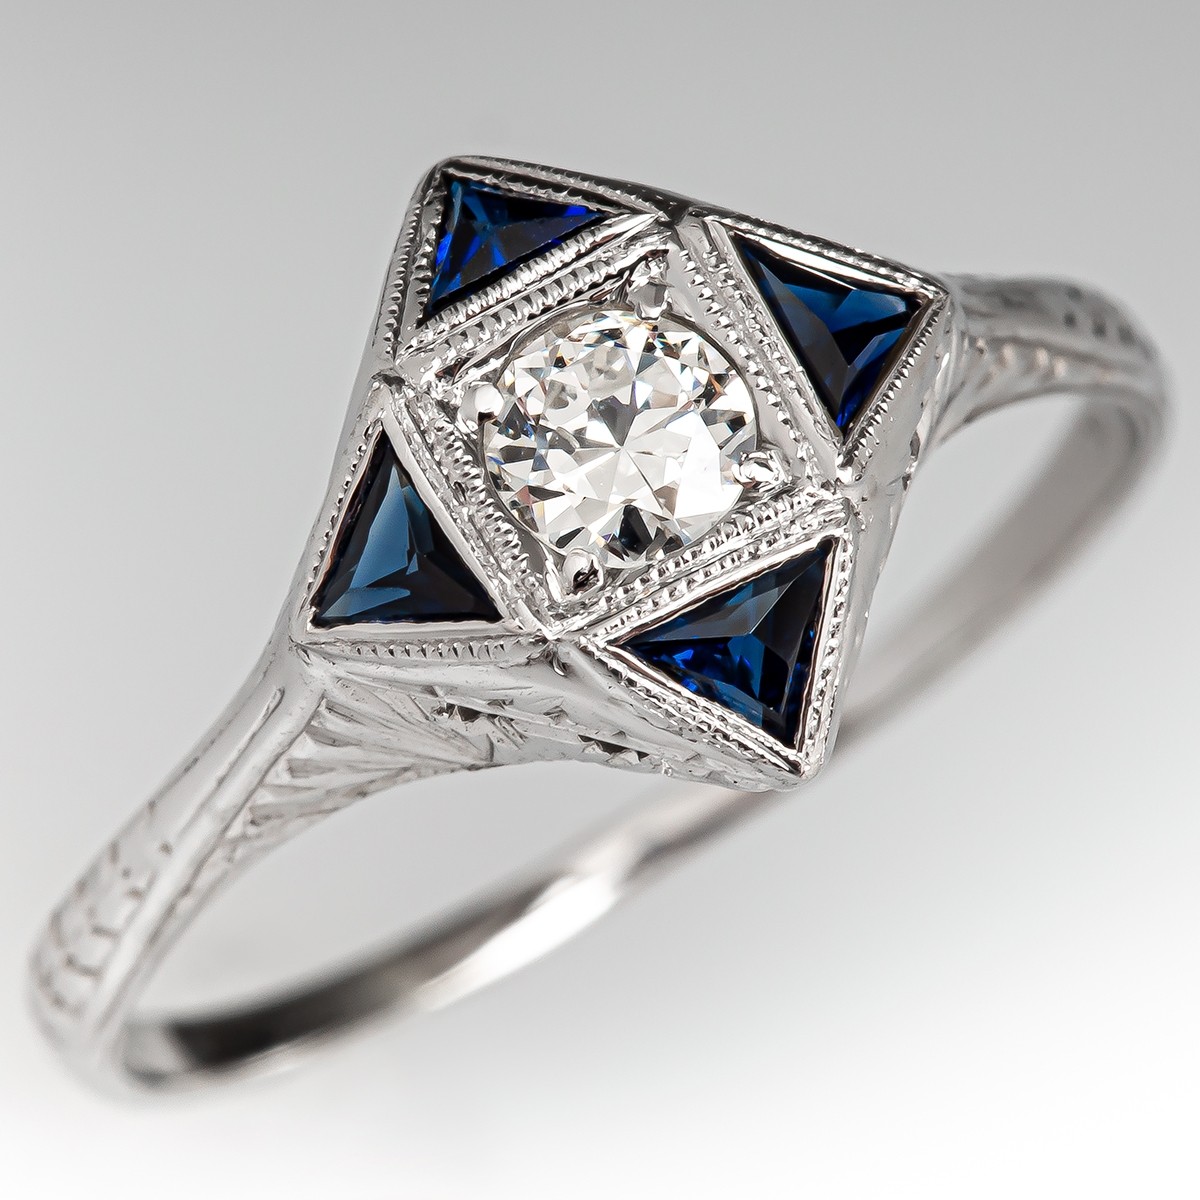 1930's Diamond Engagement Ring w/ Blue Accents 18K White Gold .20ct G/SI1